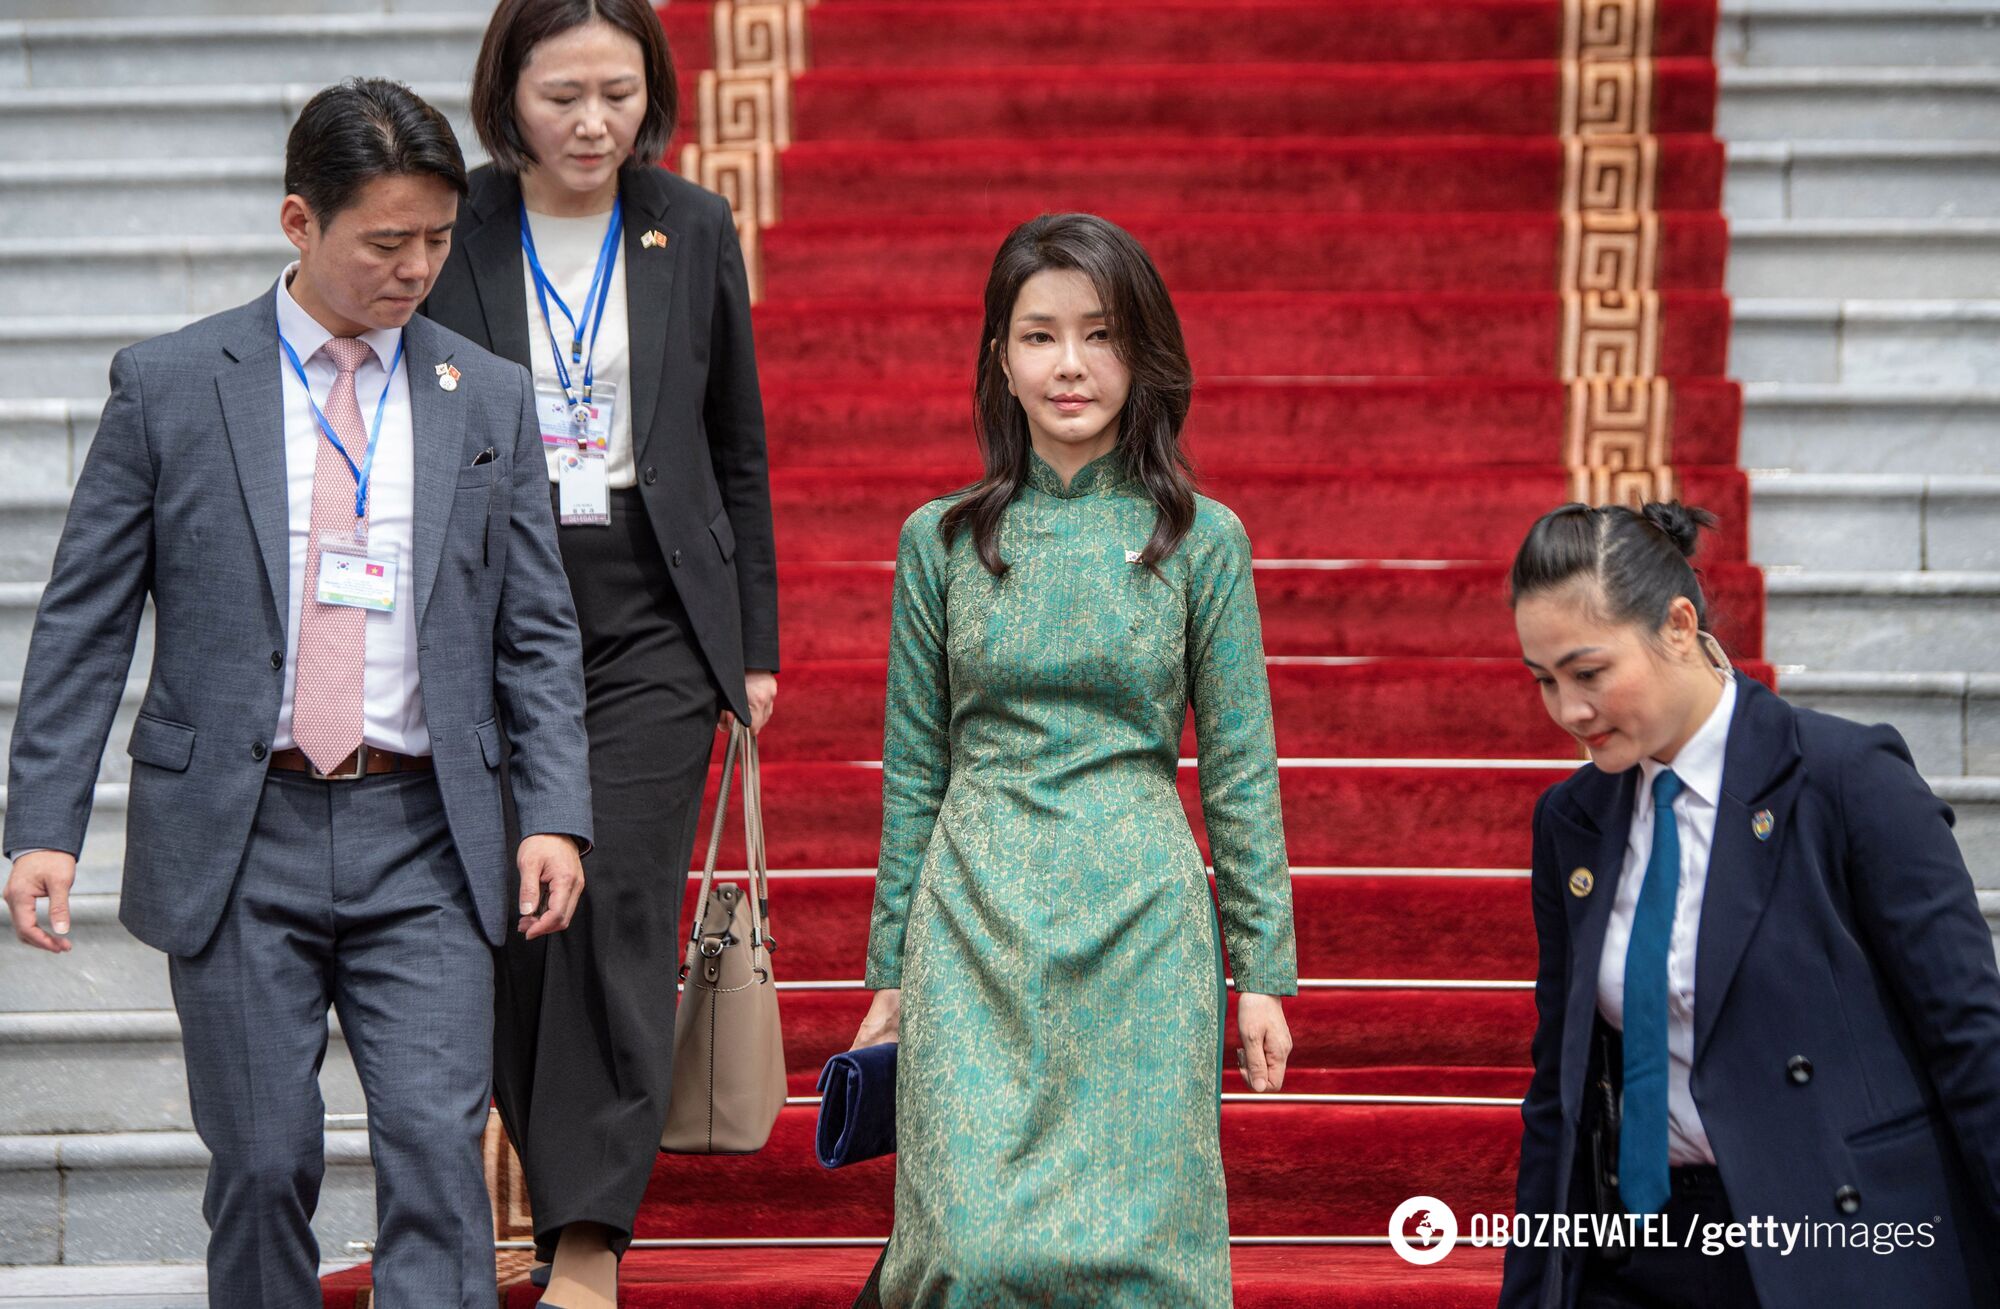 The seven best looks of the first lady of South Korea, who at 51 looks 20. Photo